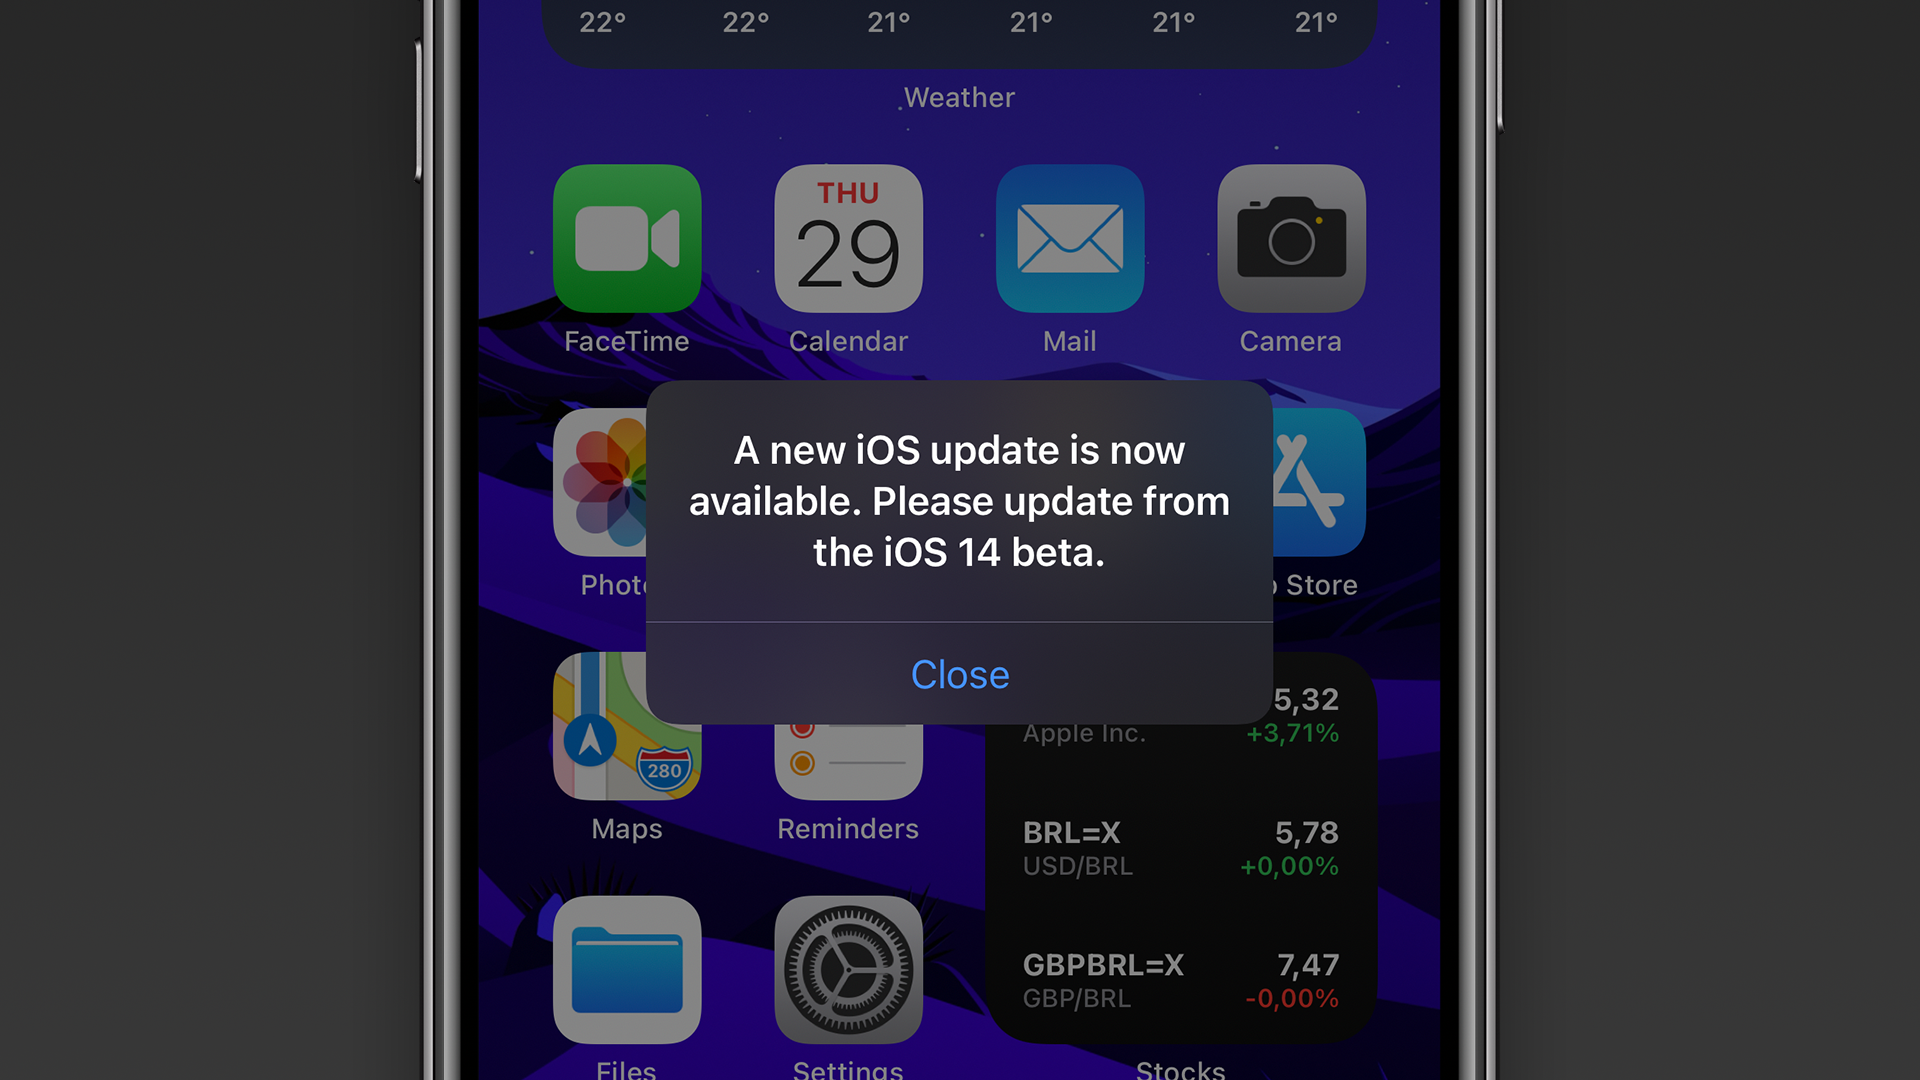 Apple fixes iOS 14.2 GM with ‘new iOS update’ alert and more